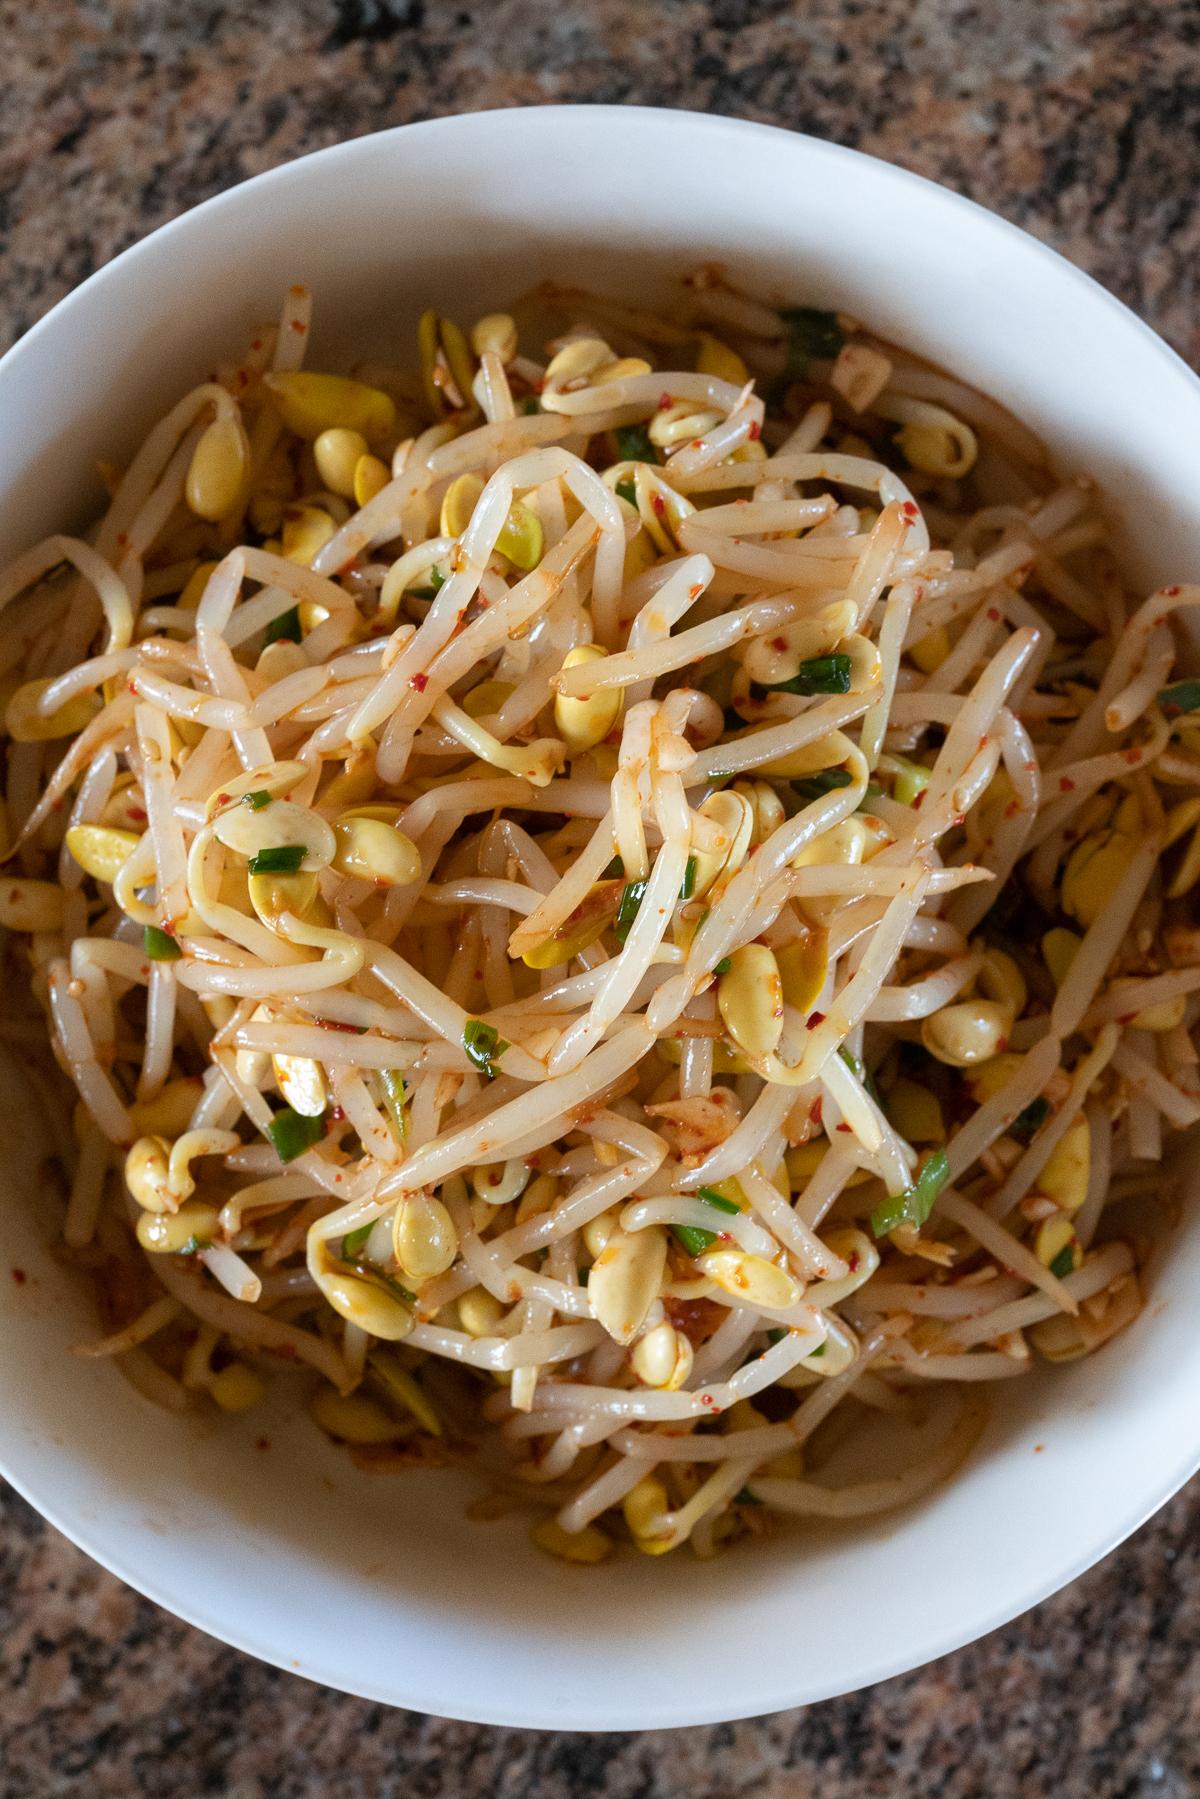 Korean Bean Sprouts in a bowl, ready to eat